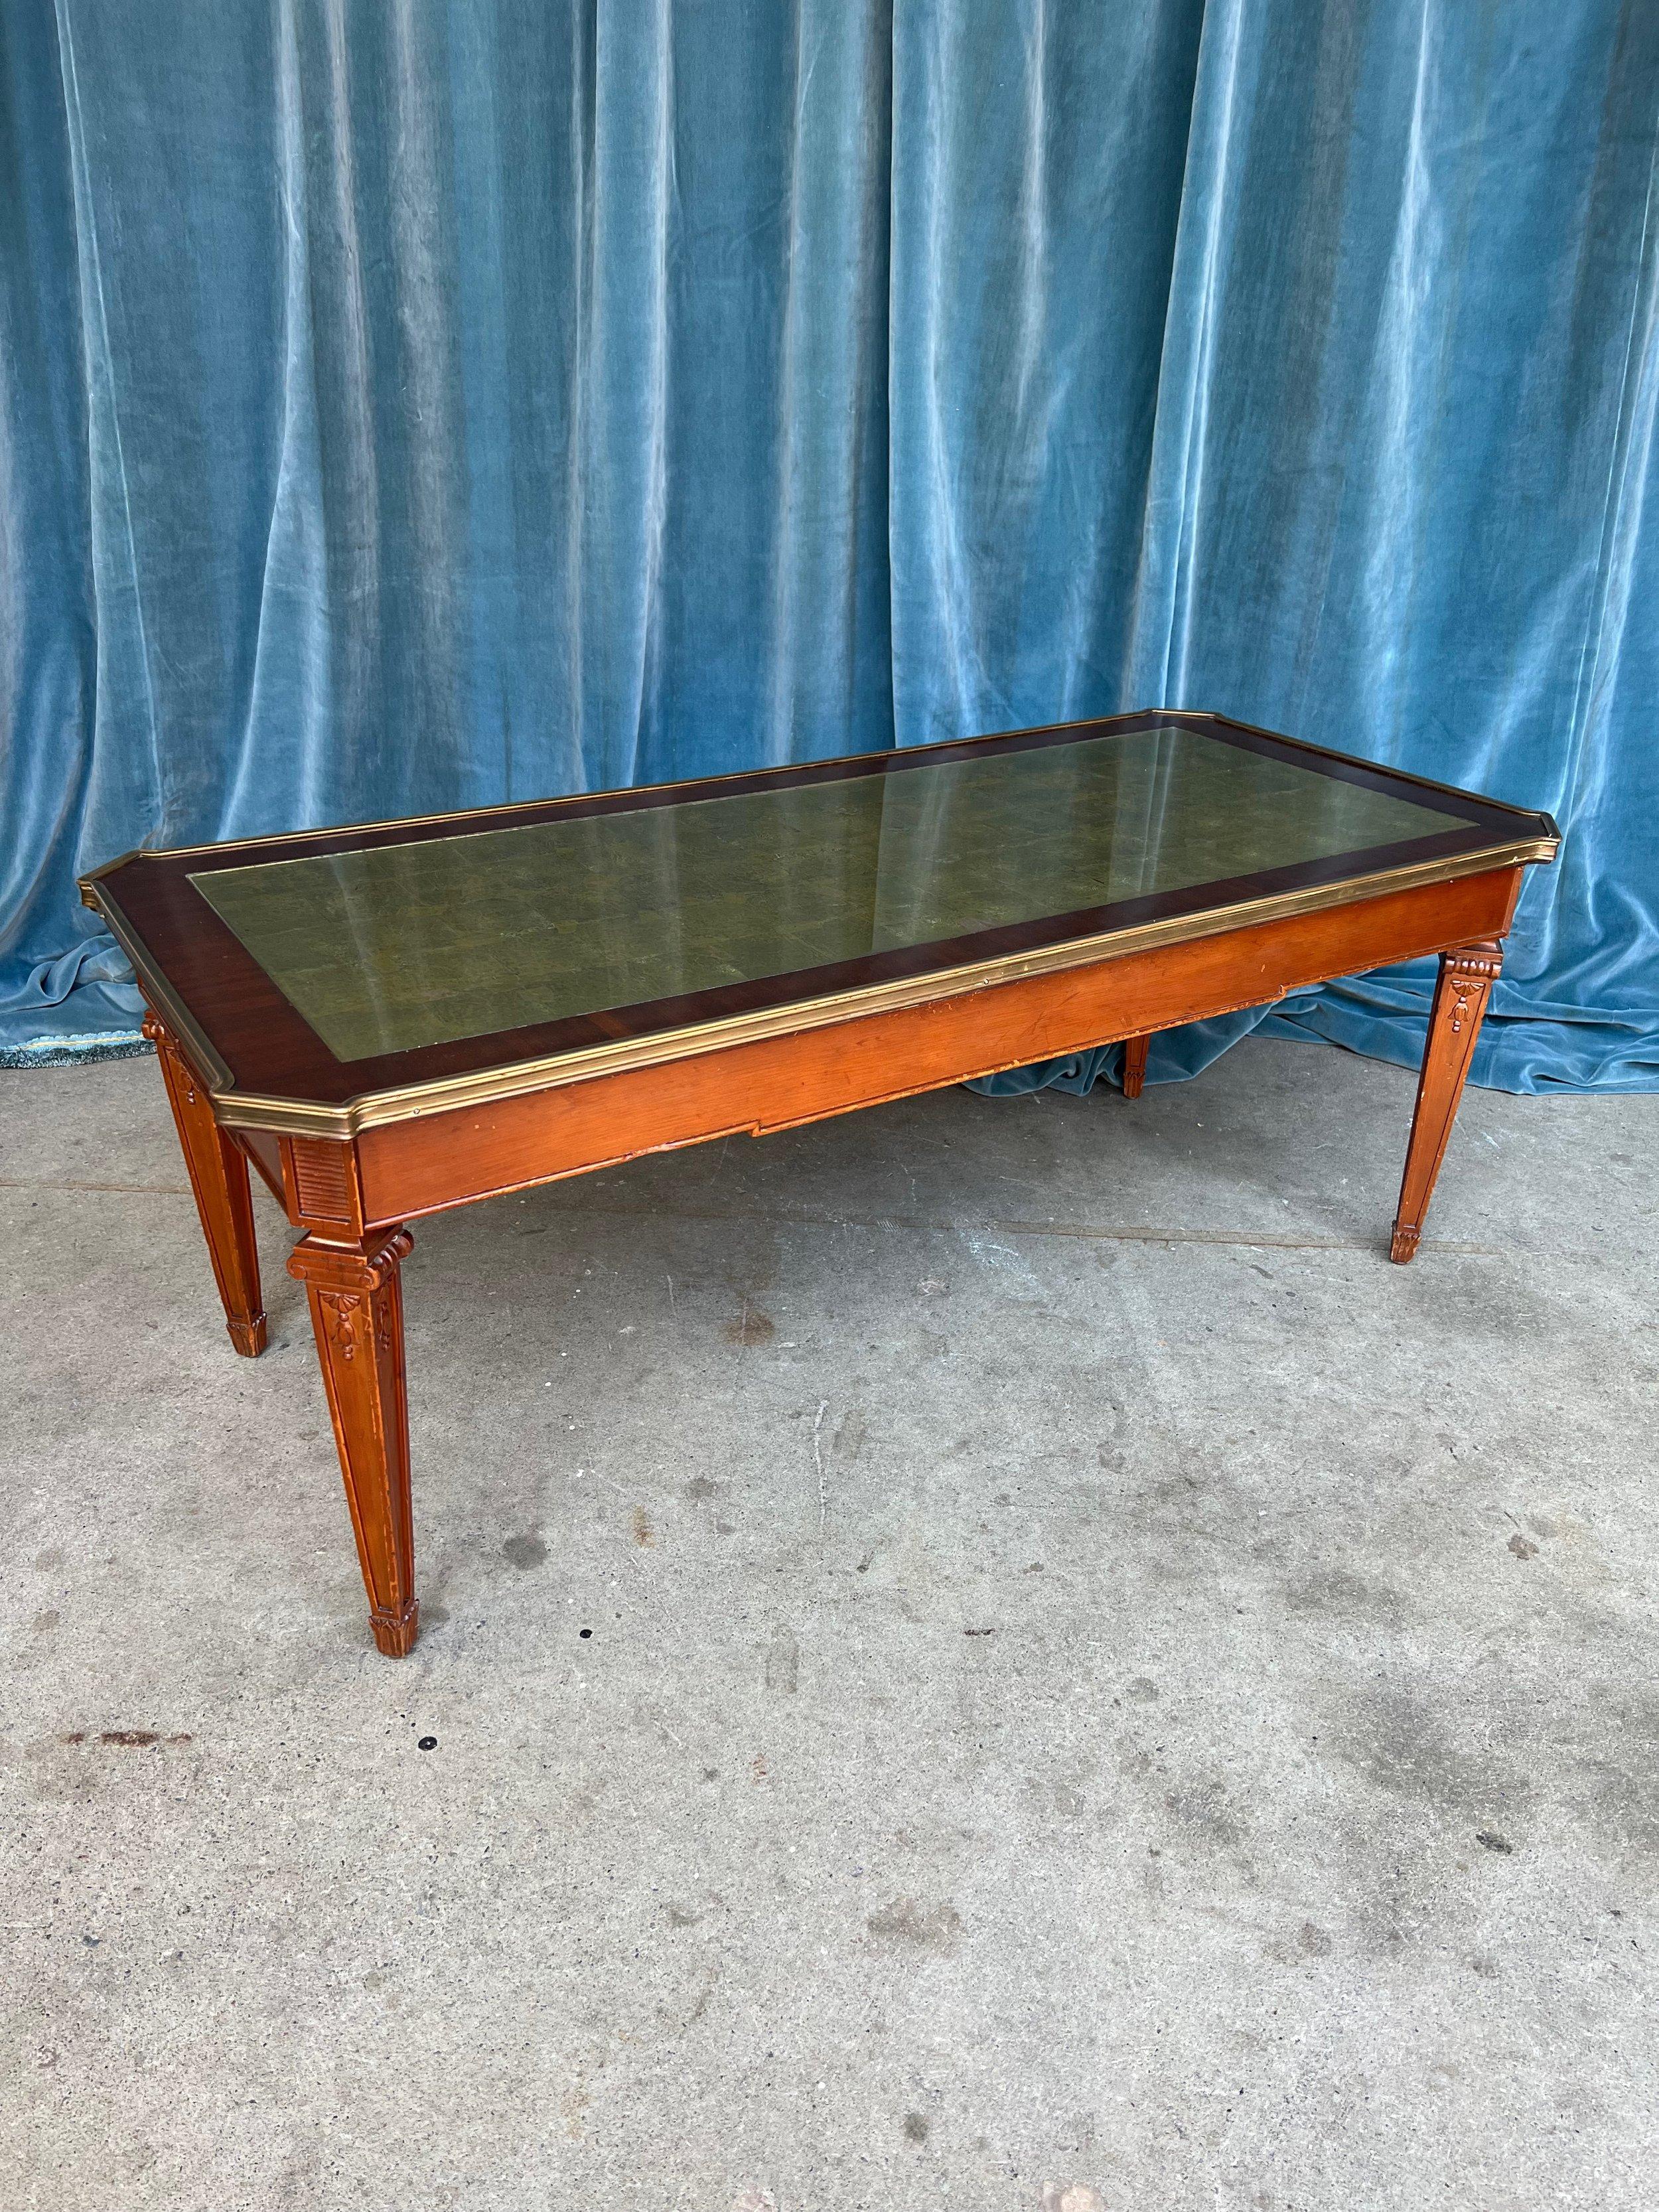 Embrace the splendor of this exquisite Italian neoclassical style coffee table from the 1940s, a stunning centerpiece that commands attention. The base, constructed from solid mahogany, showcases remarkable durability and craftsmanship. Its legs are